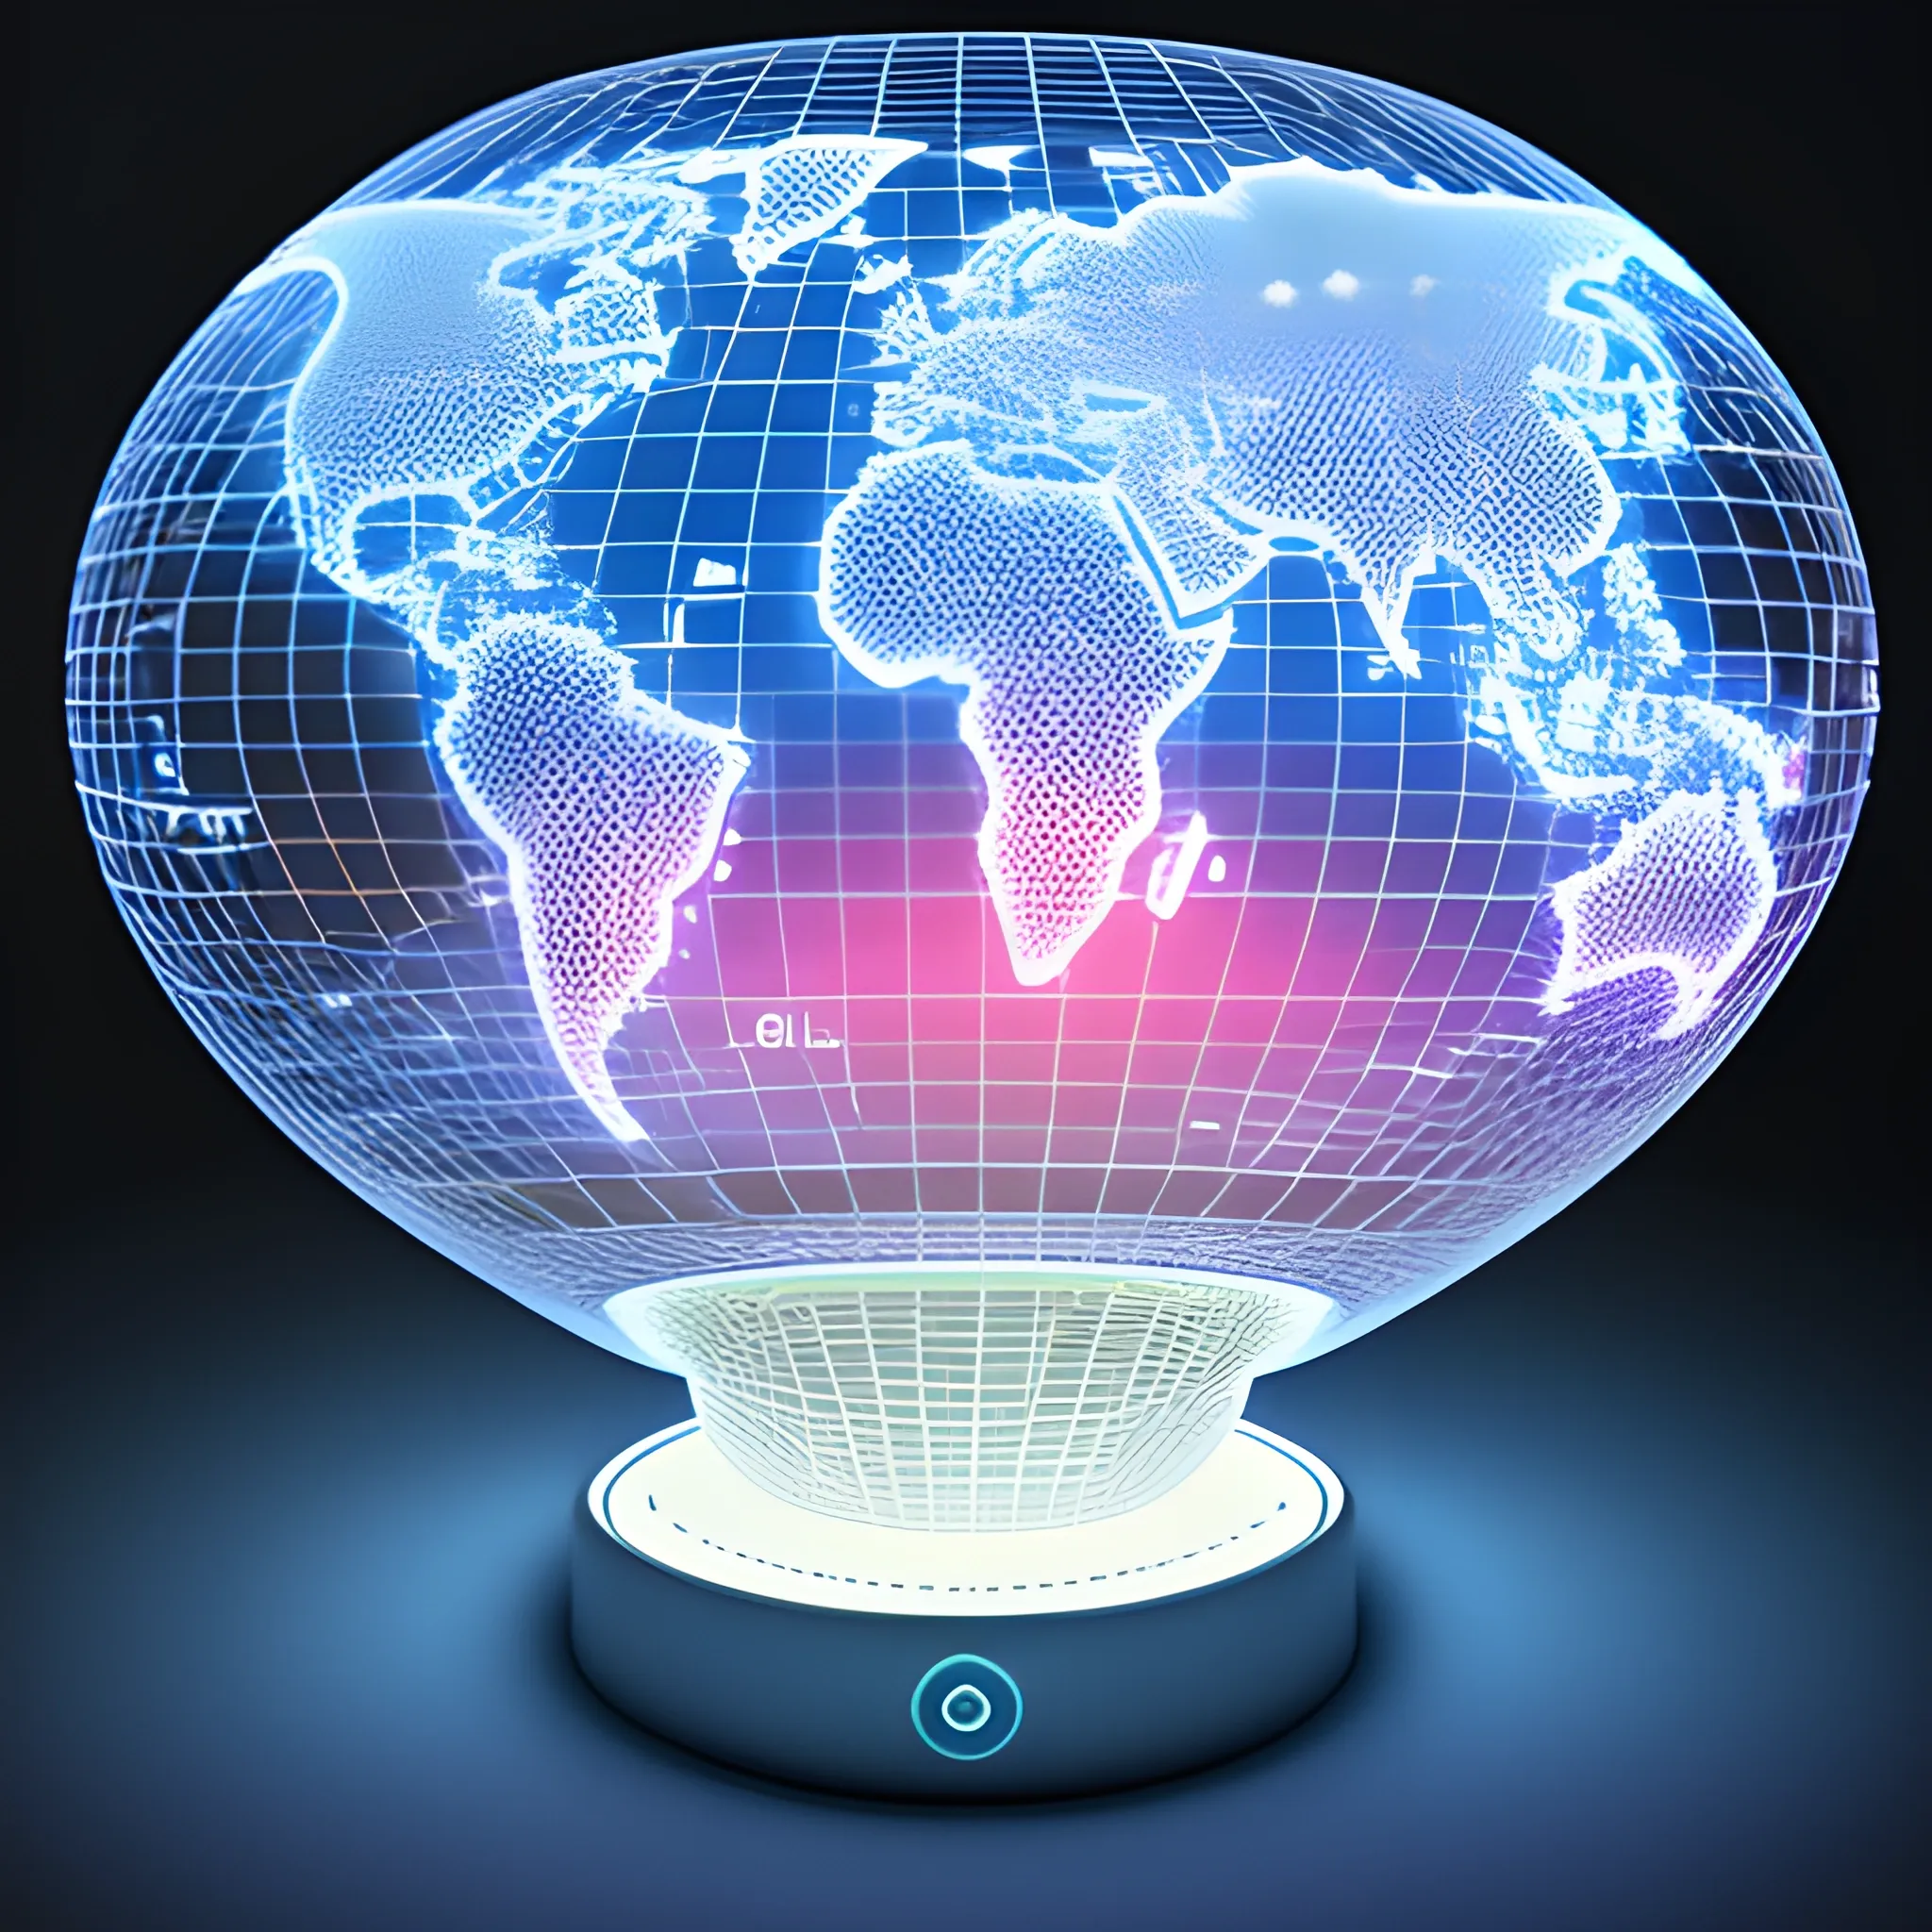 Internet map, divided by low-resolution spheres, projected onto a holographic menu, from a tablet, in dramatic light., 3D